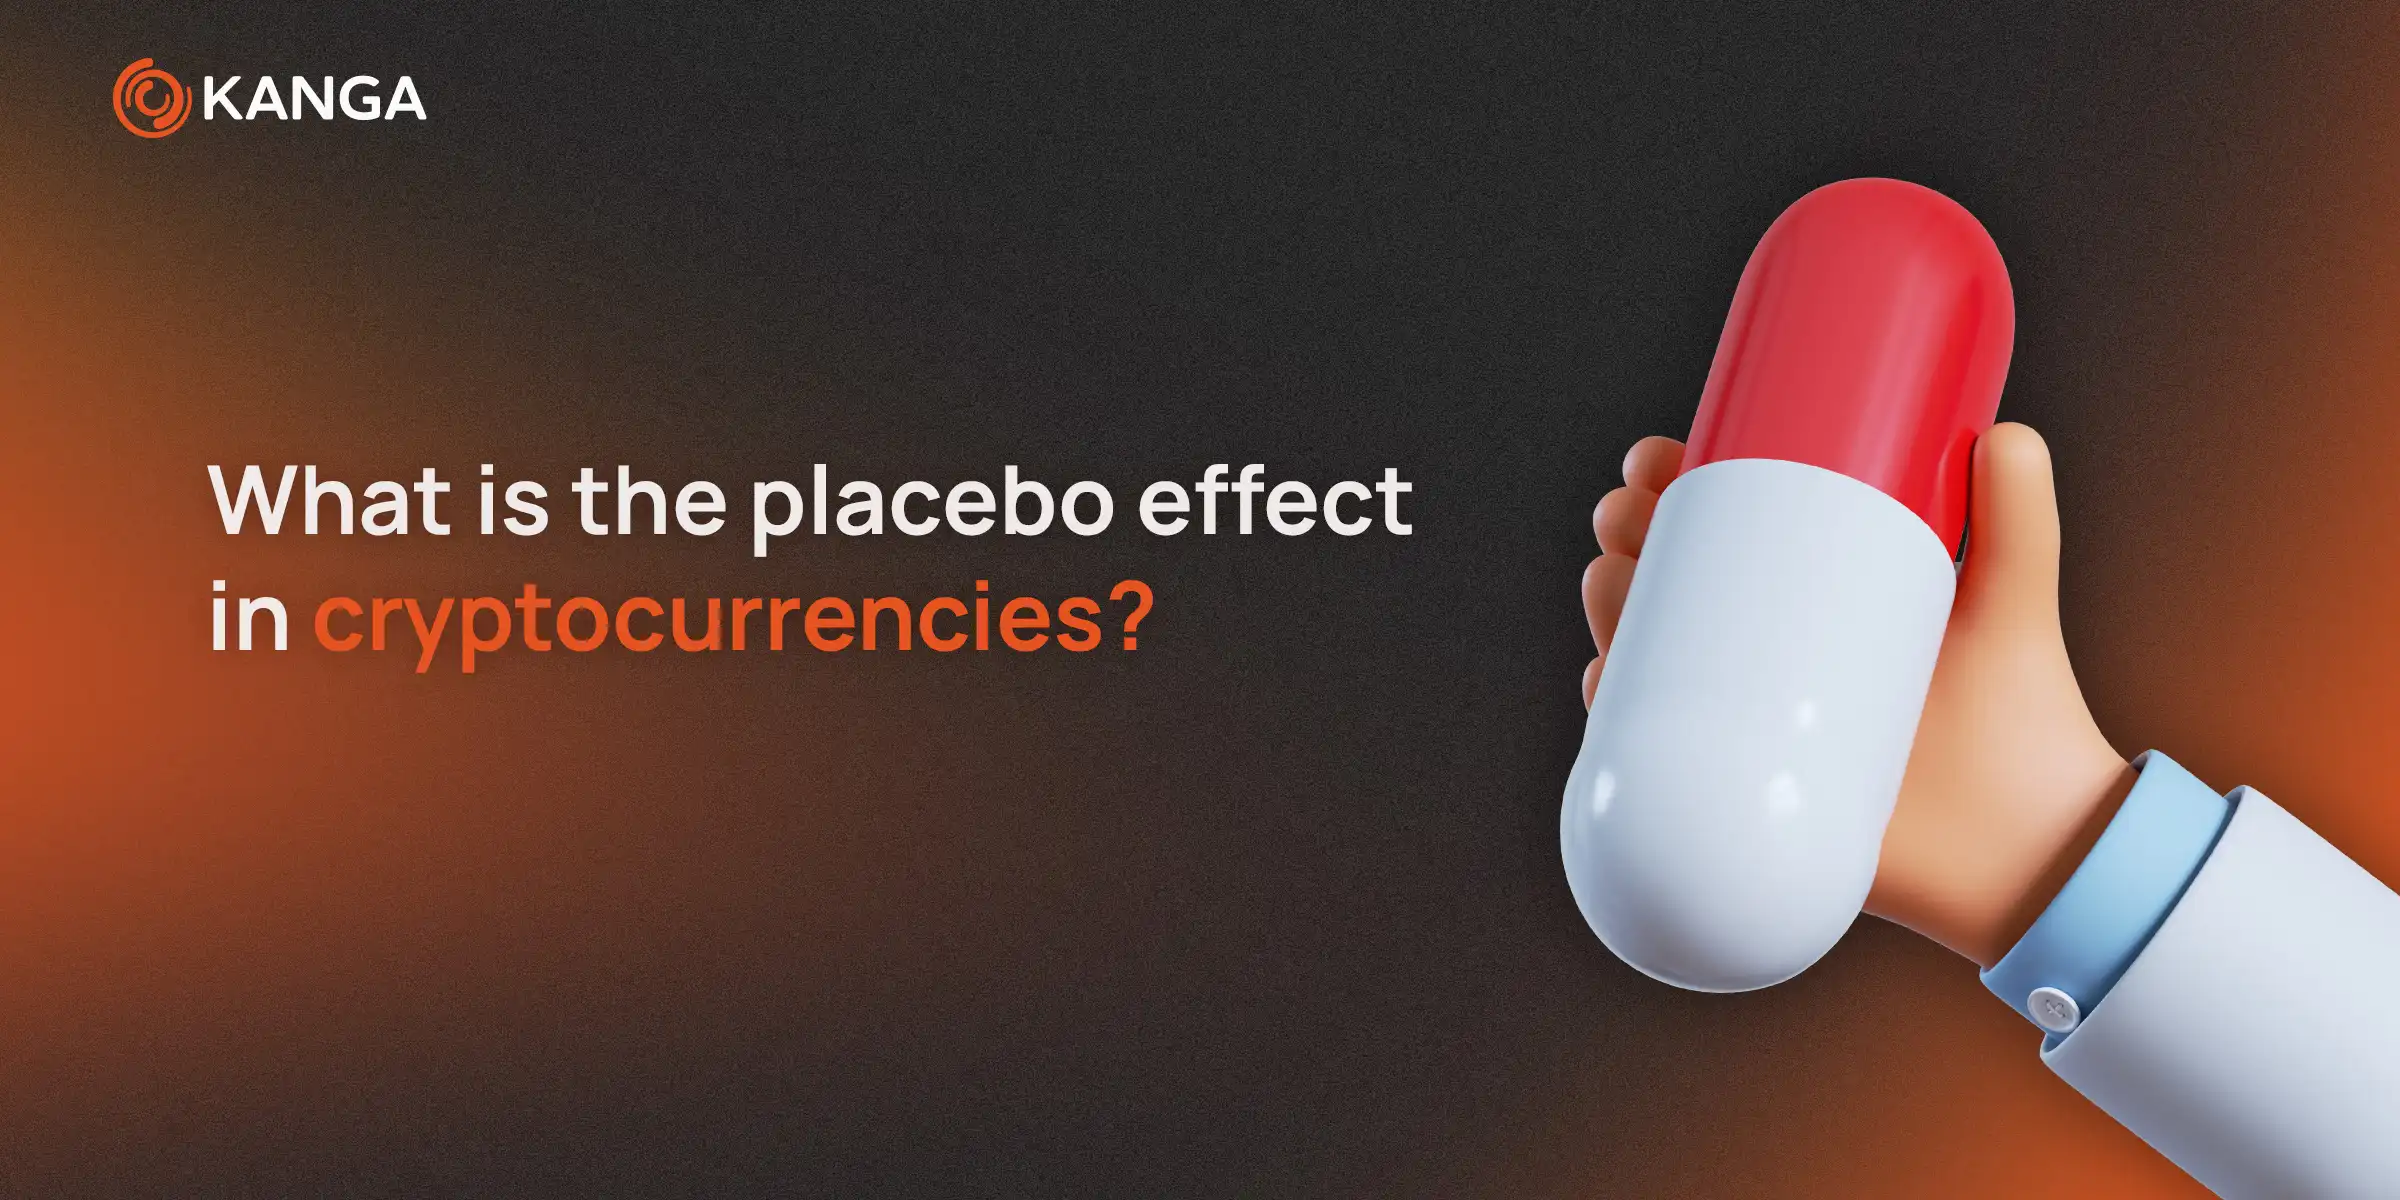 What is the placebo effect in cryptocurrencies?